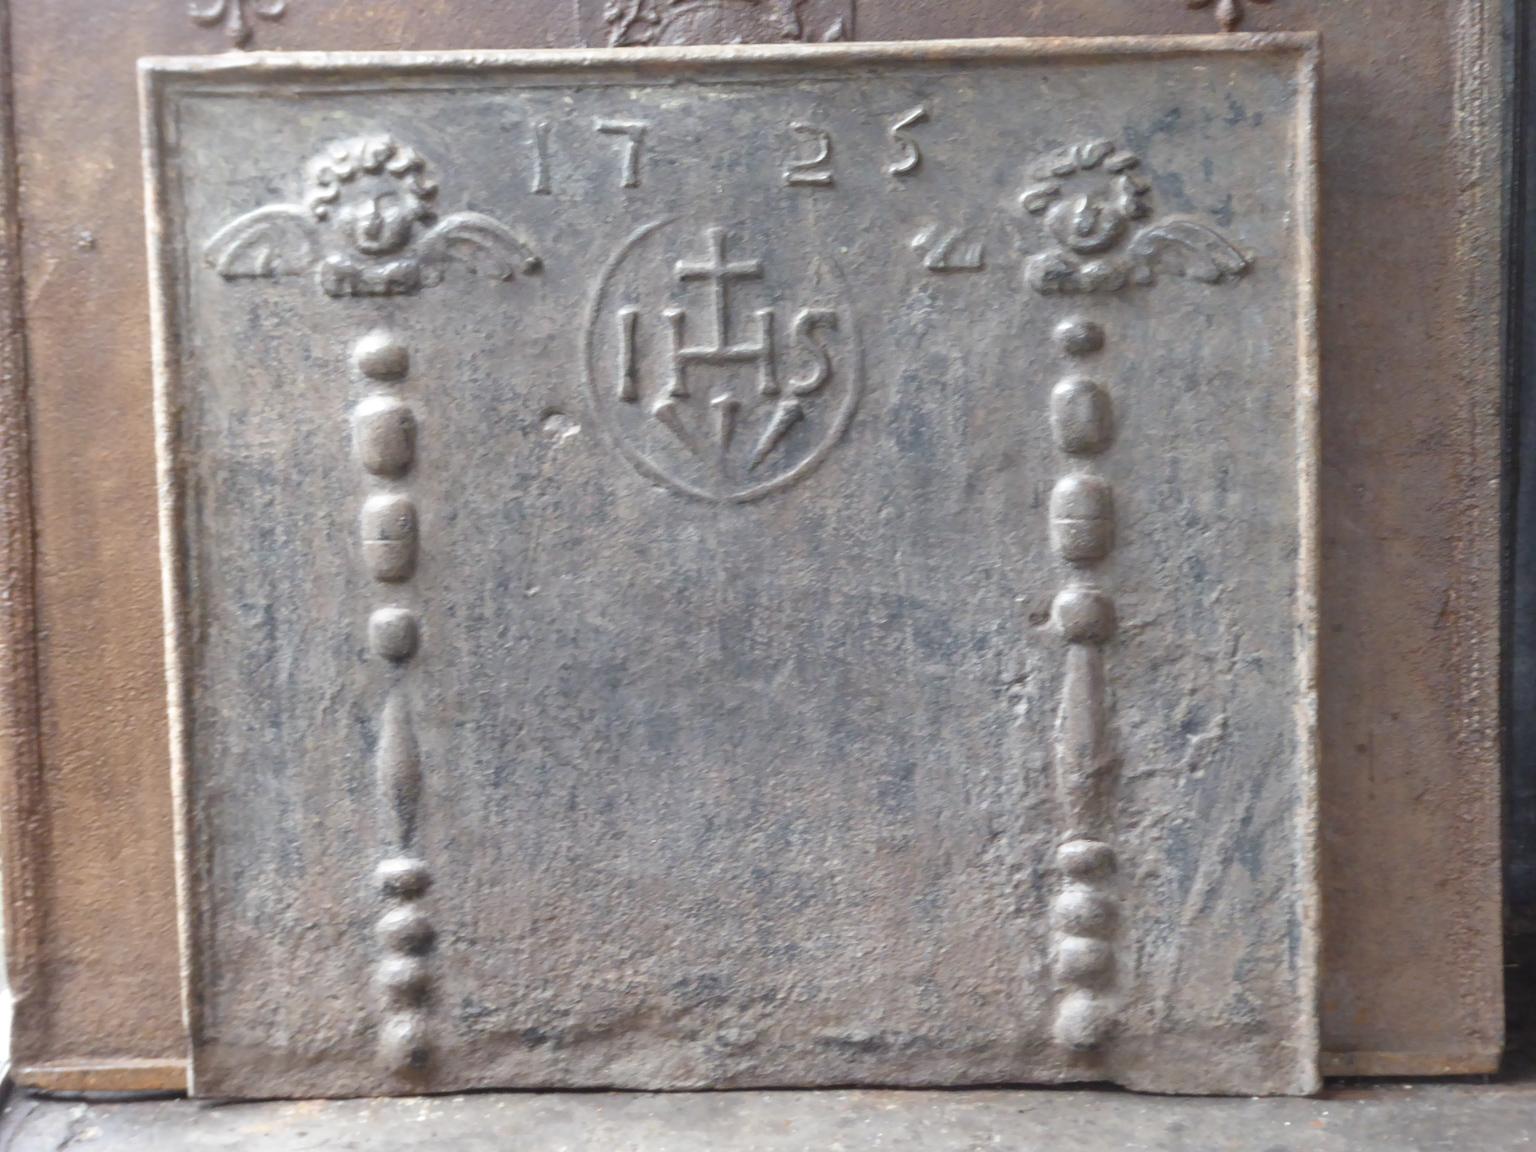 18th century Louis XV French fireback with pillars topped with angels, an IHS monogram, and the date of production 1725.

The monogram IHS stands for Iesus Hominum Salvator (Jesus the Savior of Humanity) or In Hoc Signo (In this sign will you win).